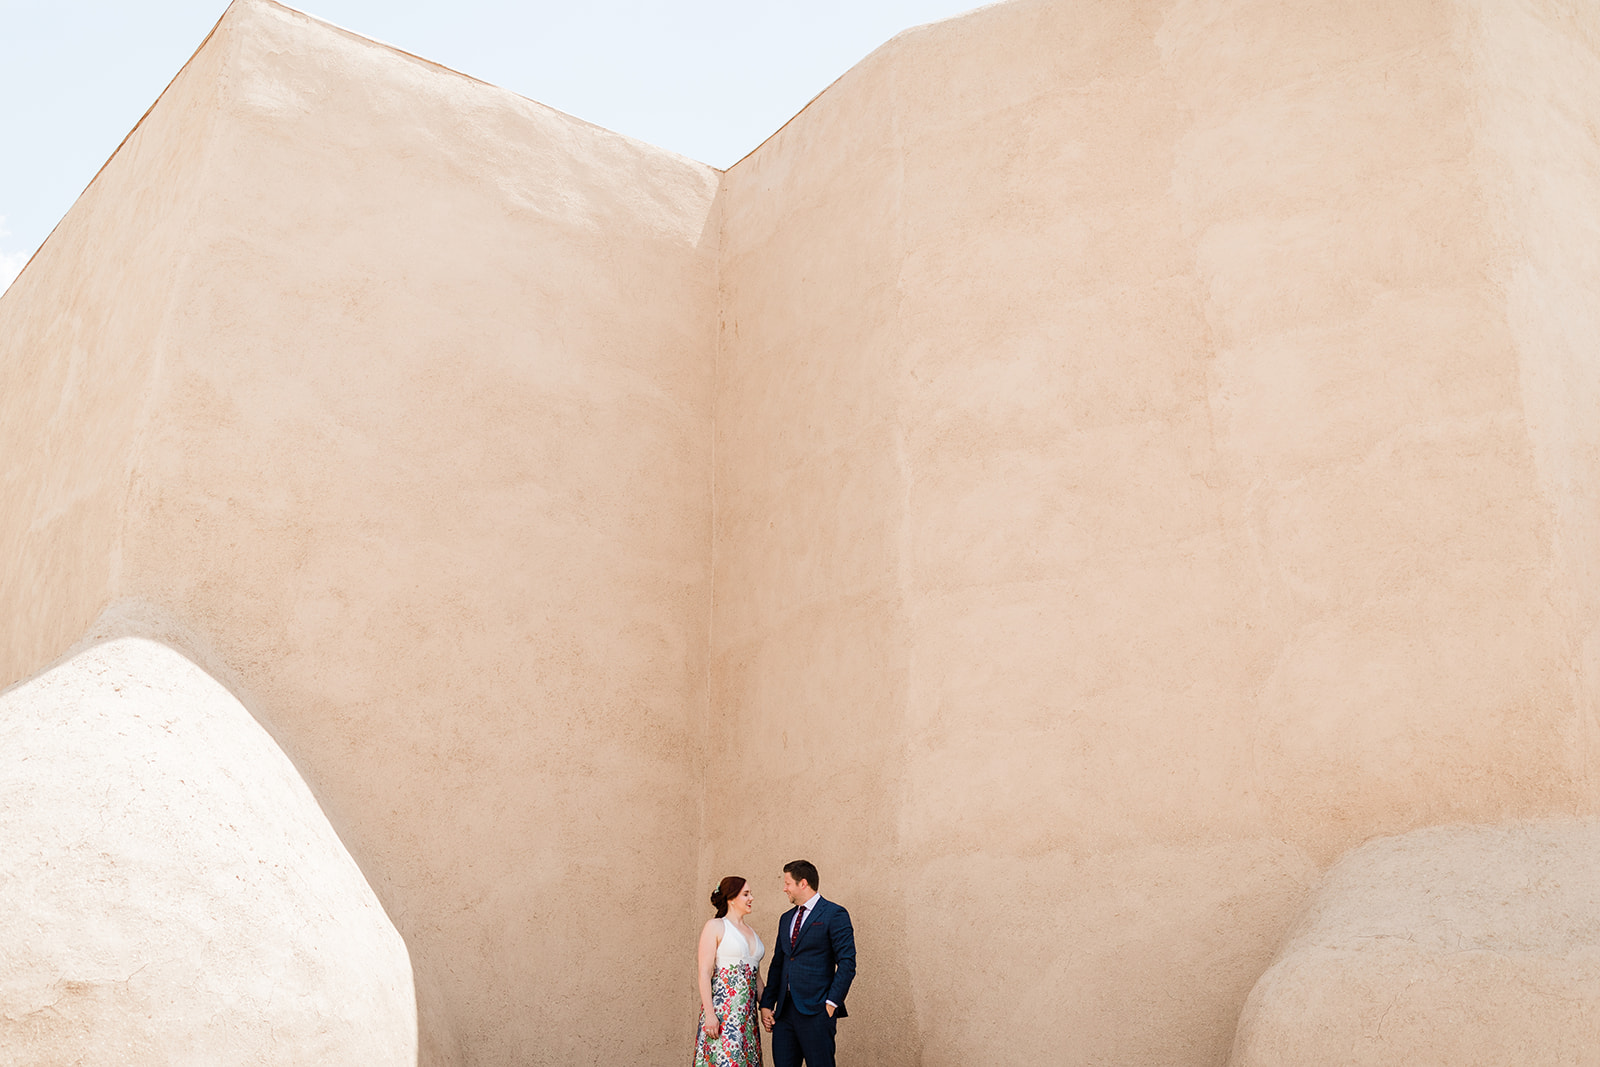 Bride and Groom portraits in front of iconic Taos New Mexico architecture